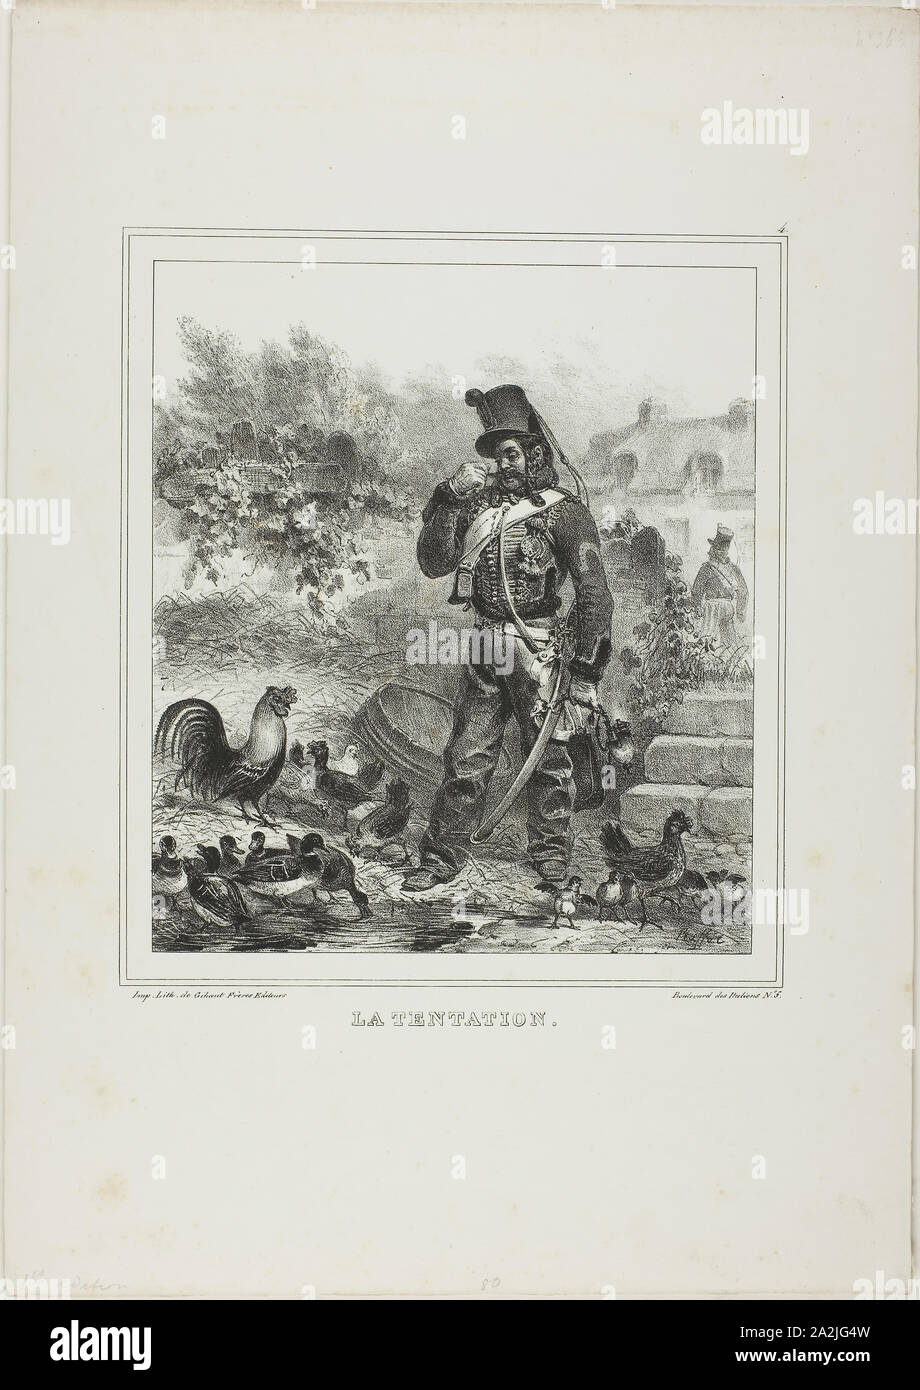 Temptation, 1833, Denis Auguste Marie Raffet (French, 1804-1860), printed by Chez Gihaut Frères (French, 19th century), France, Lithograph in black on ivory wove paper, 197 × 187 mm (image), 401 × 282 mm (sheet Stock Photo